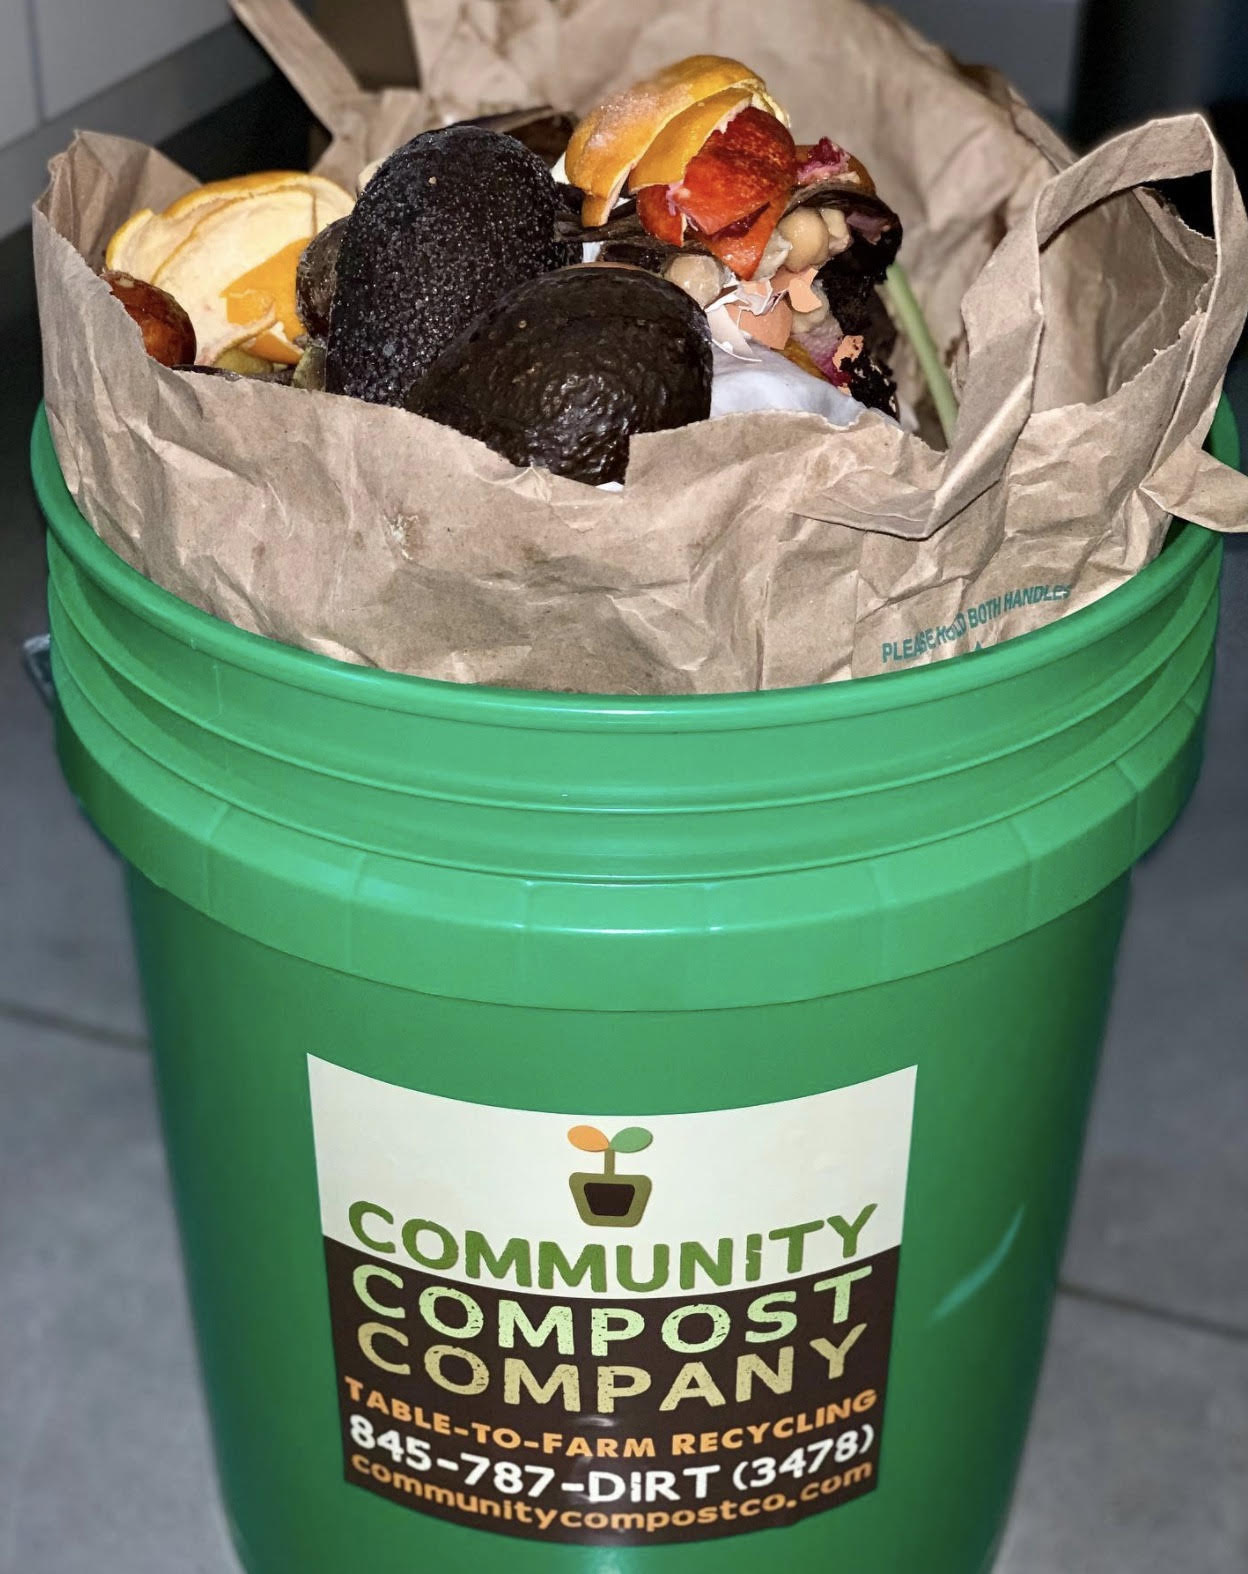 community compost company expands